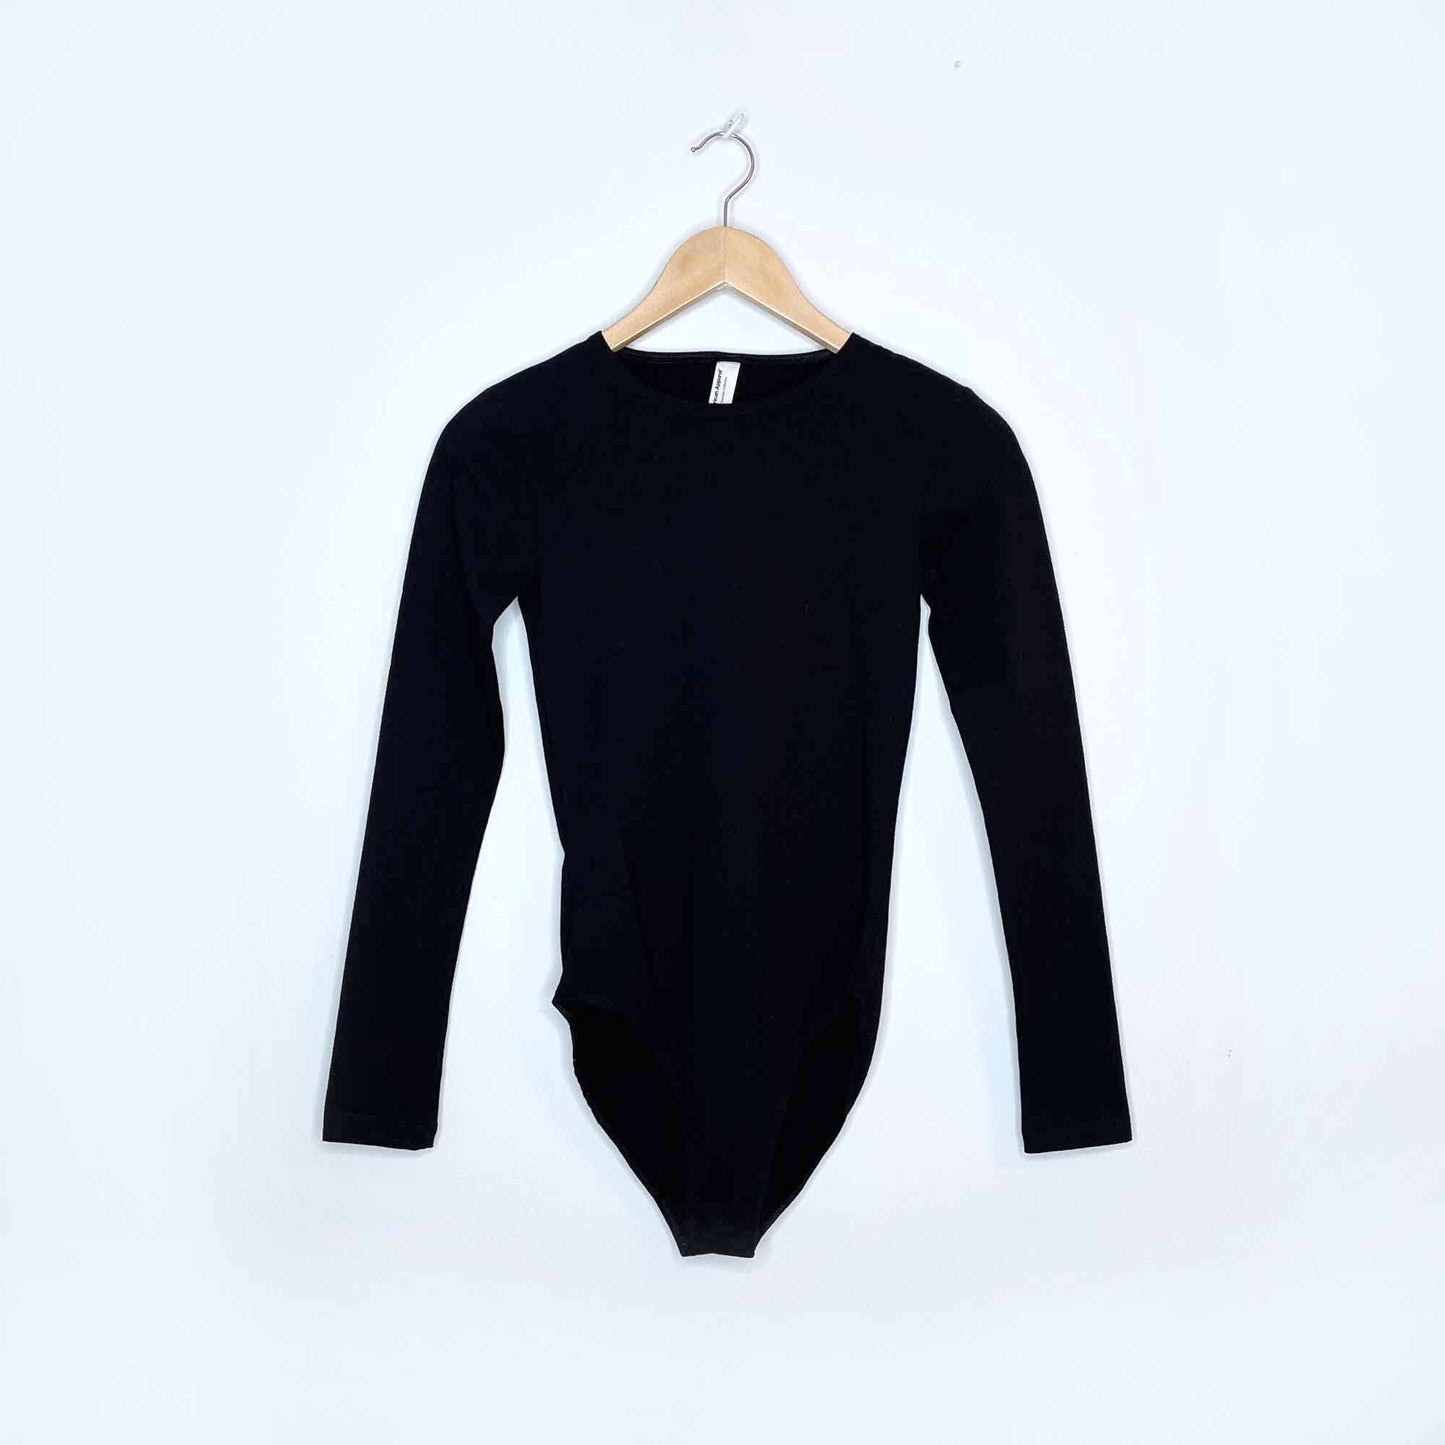 American Apparel cotton jersey long sleeve bodysuit - size Small